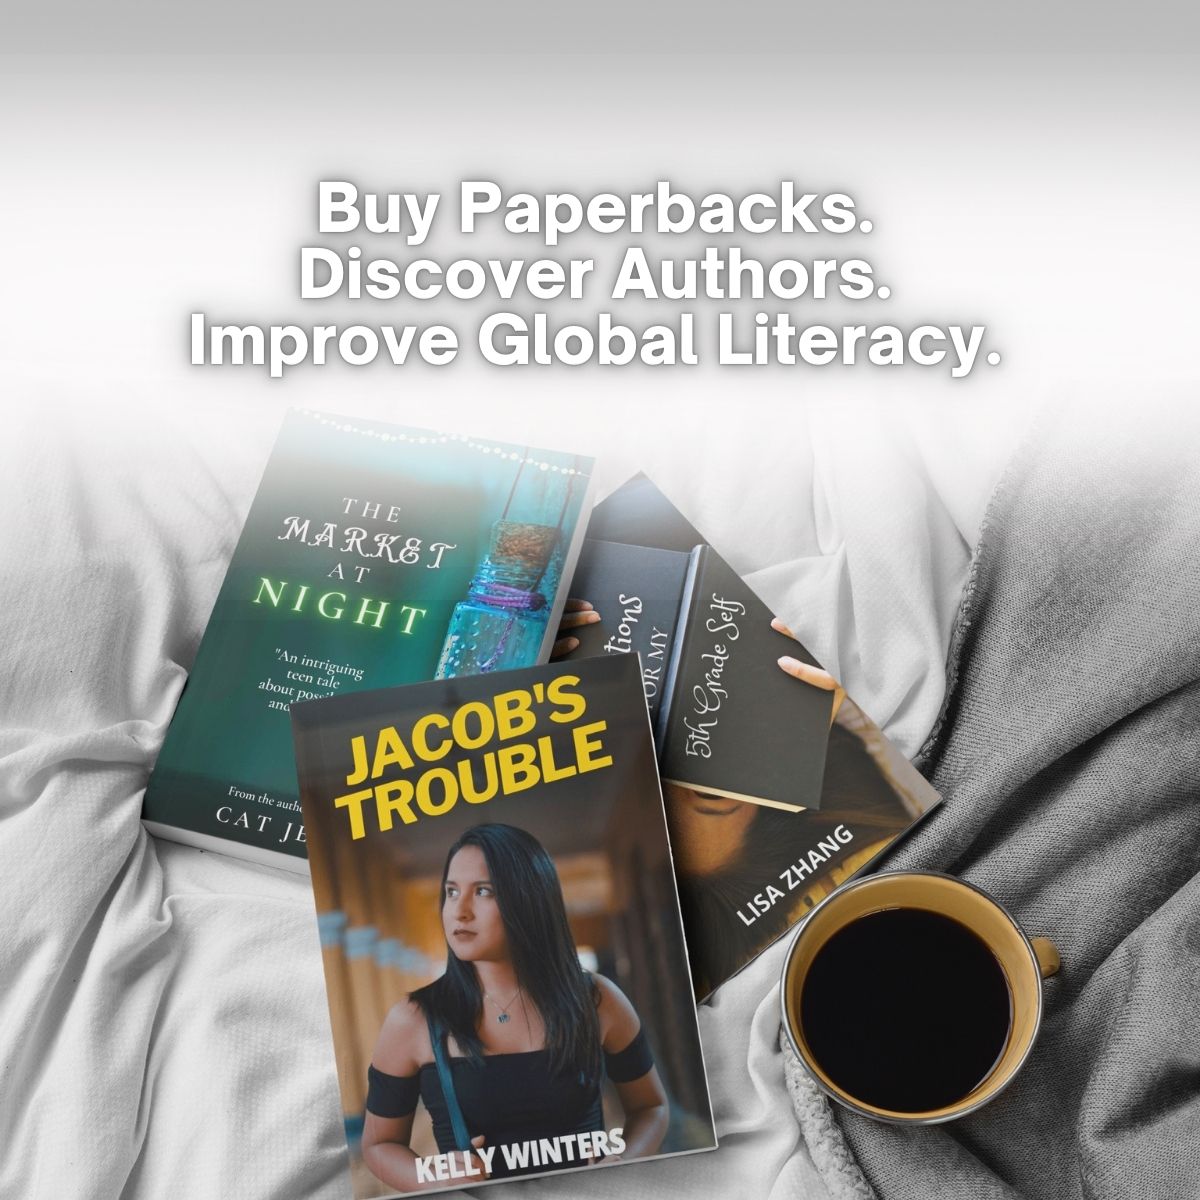 Buy Paperbacks. Discover Authors. Improve Global Literacy